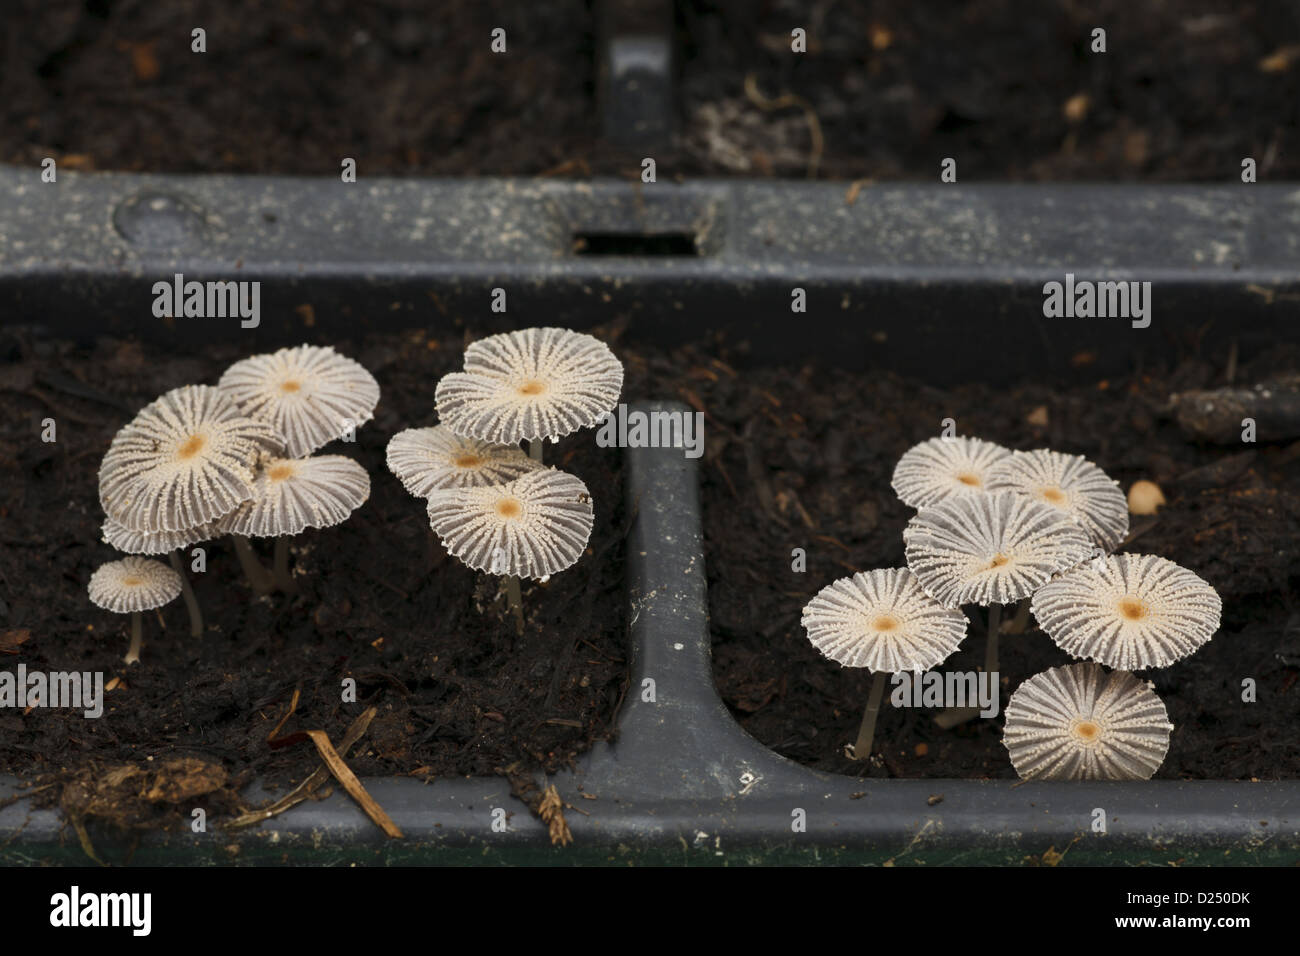 Small Inkcap Fungi (Coprinus sp.) fruiting bodies, growing out of compost in plant trays, Powys, Wales, February Stock Photo